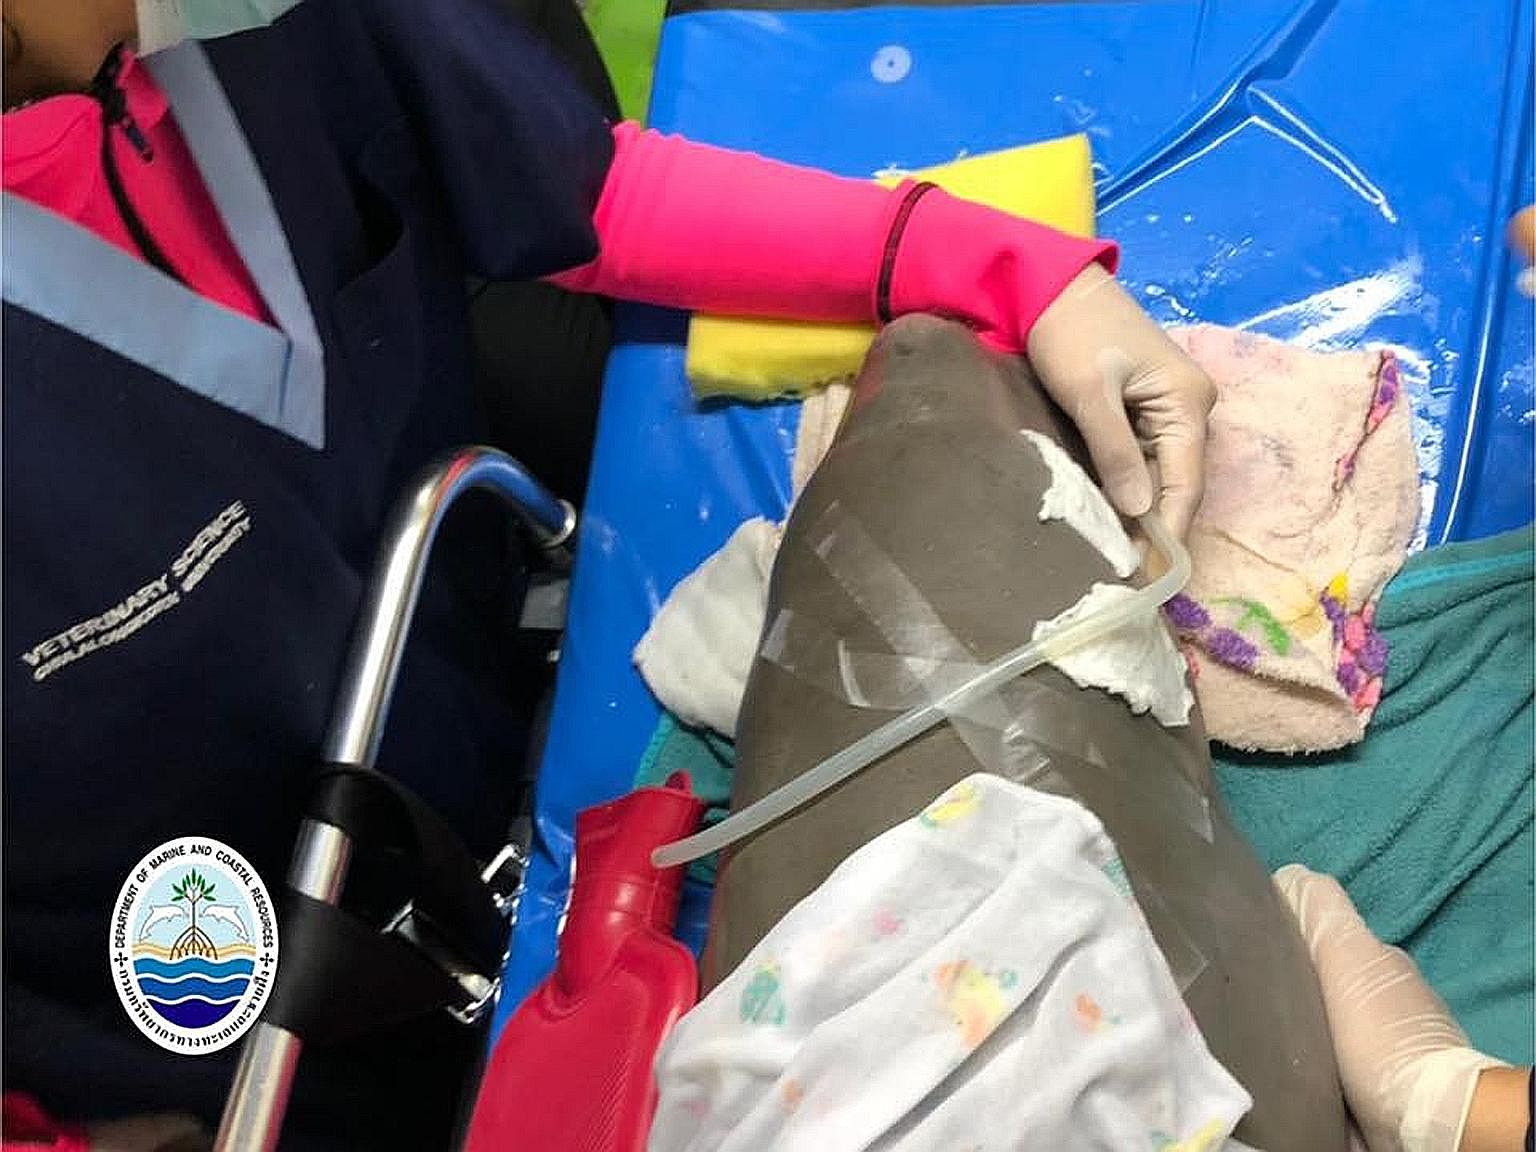 A dugong, named Jamil, had gas building up in his stomach and intestines after his digestive system failed. Despite a team of five veterinarians racing to keep the 27kg orphaned calf alive, he went into shock and died after an operation to remove sea